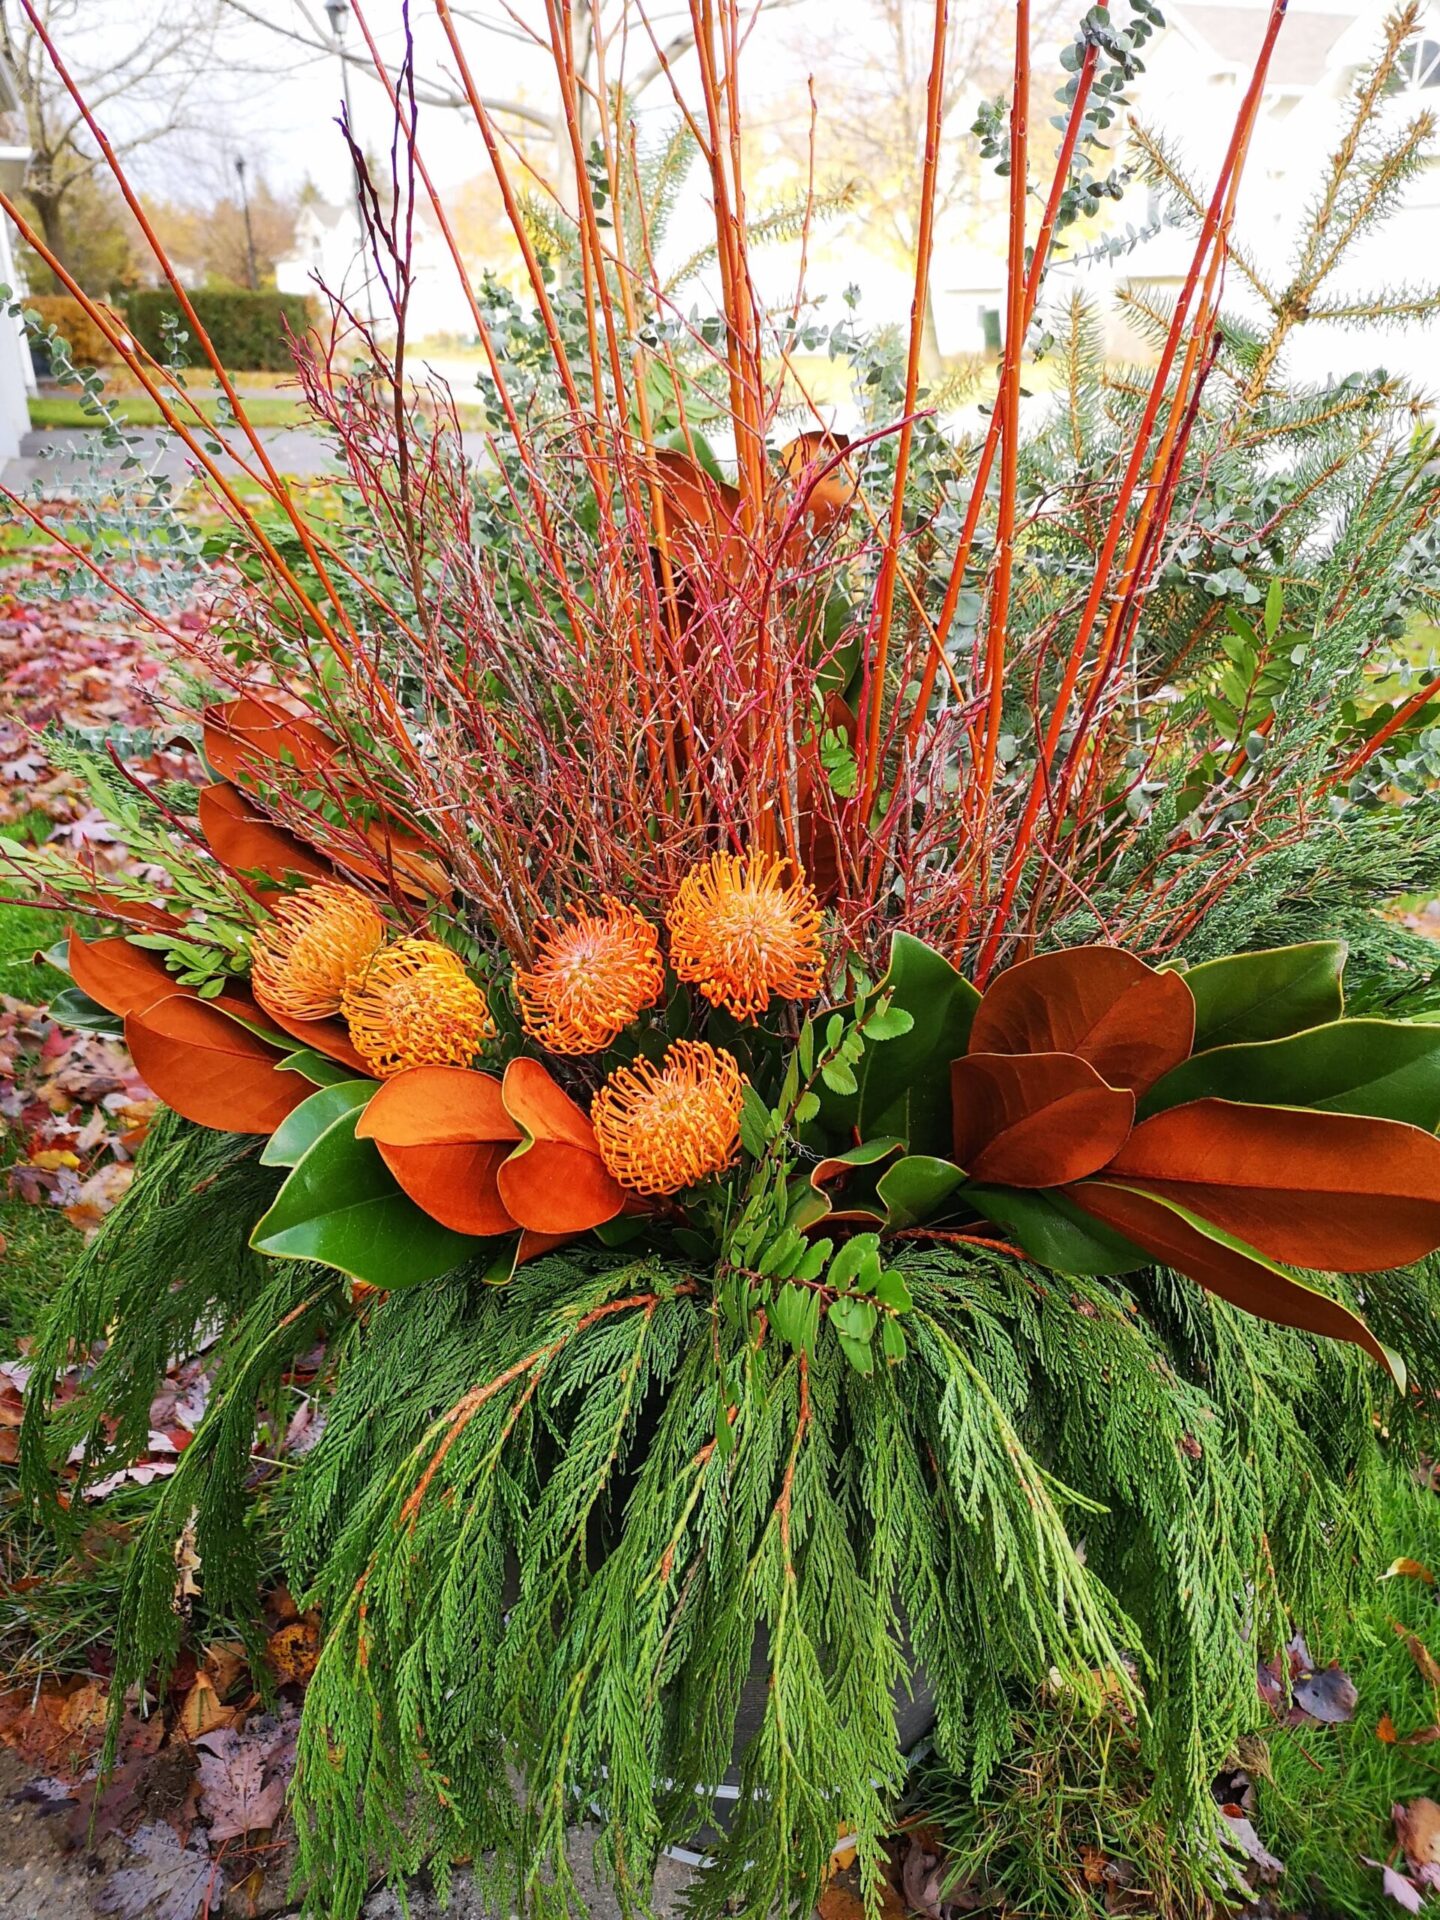 This image shows a vibrant floral arrangement with orange pincushion flowers, red twig accents, cascading greenery, and broad leaves set against an outdoor backdrop.